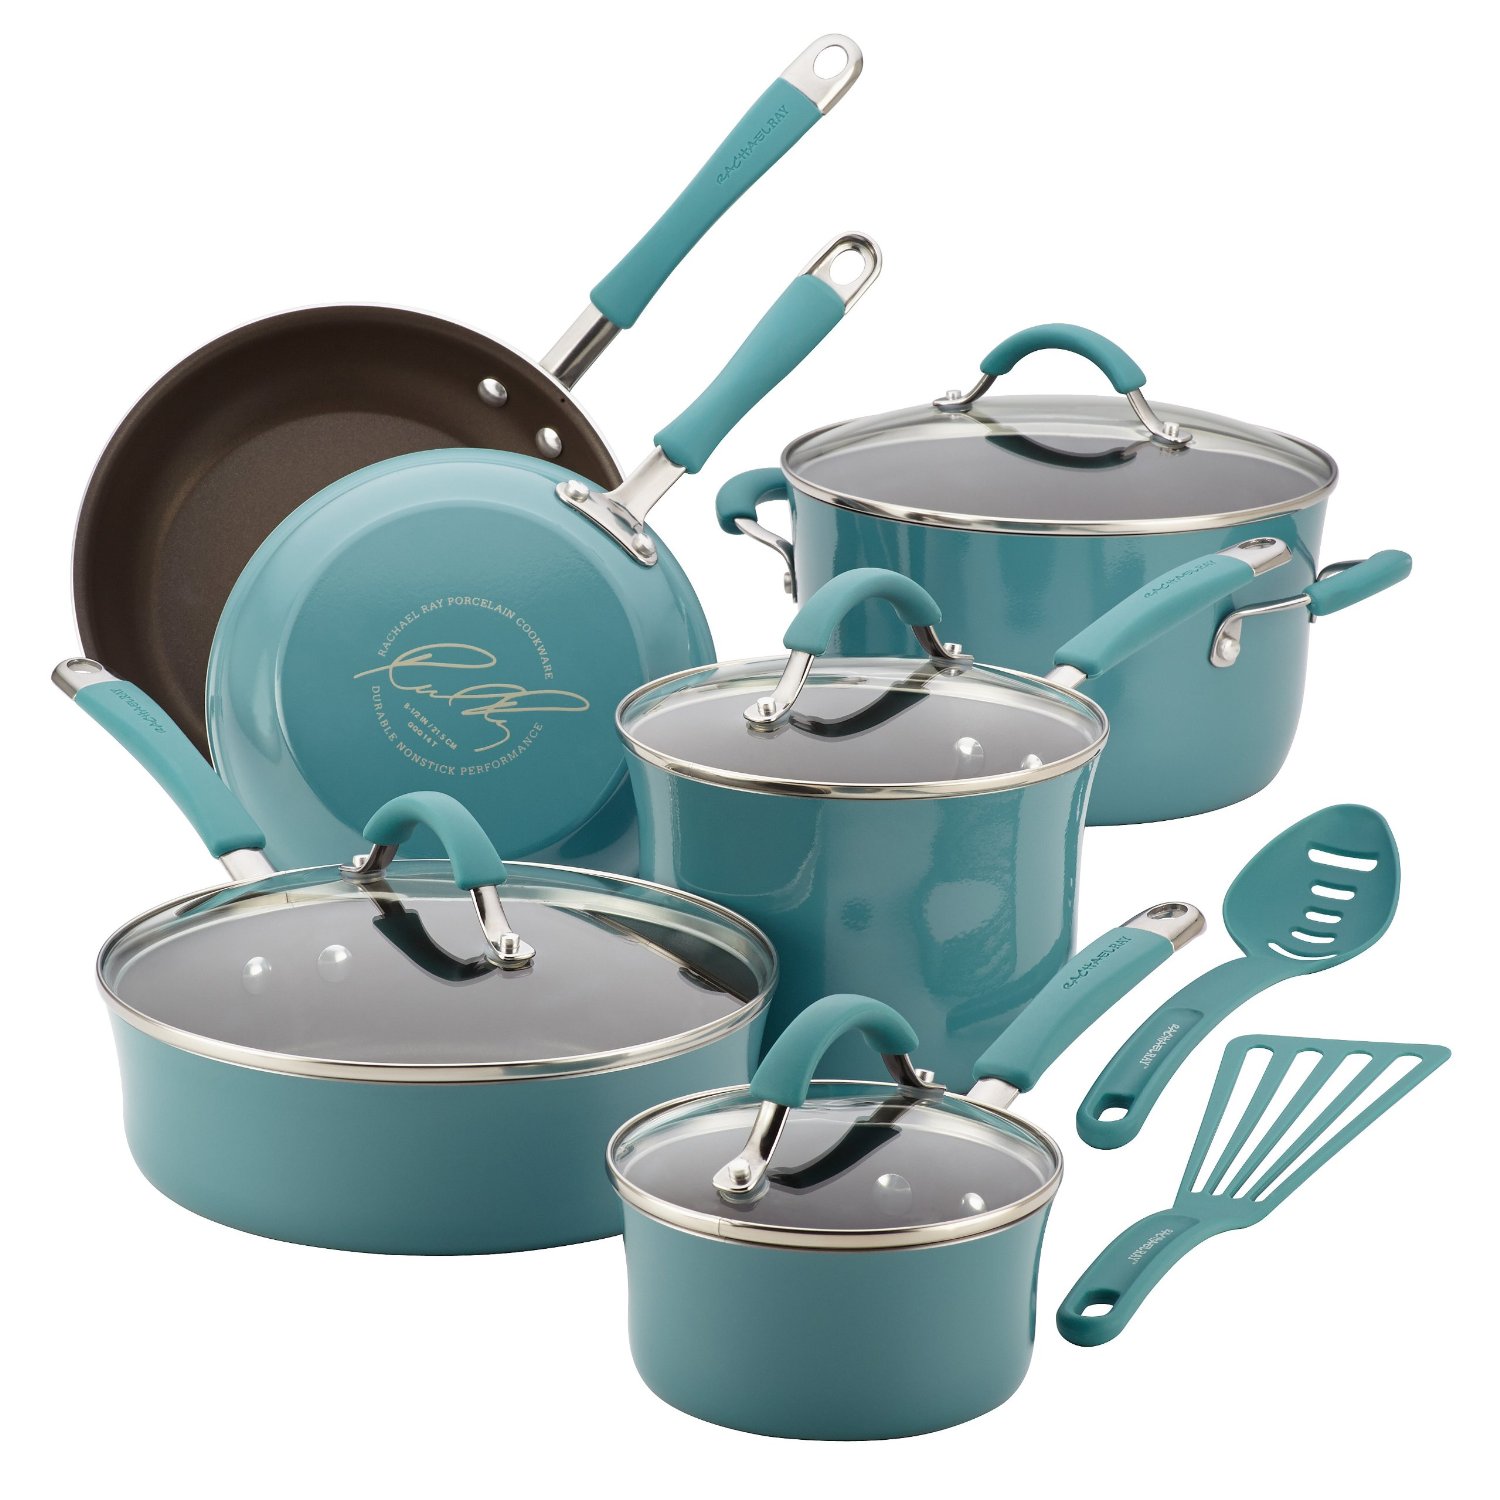 Is Rachael Ray Cookware Any Good